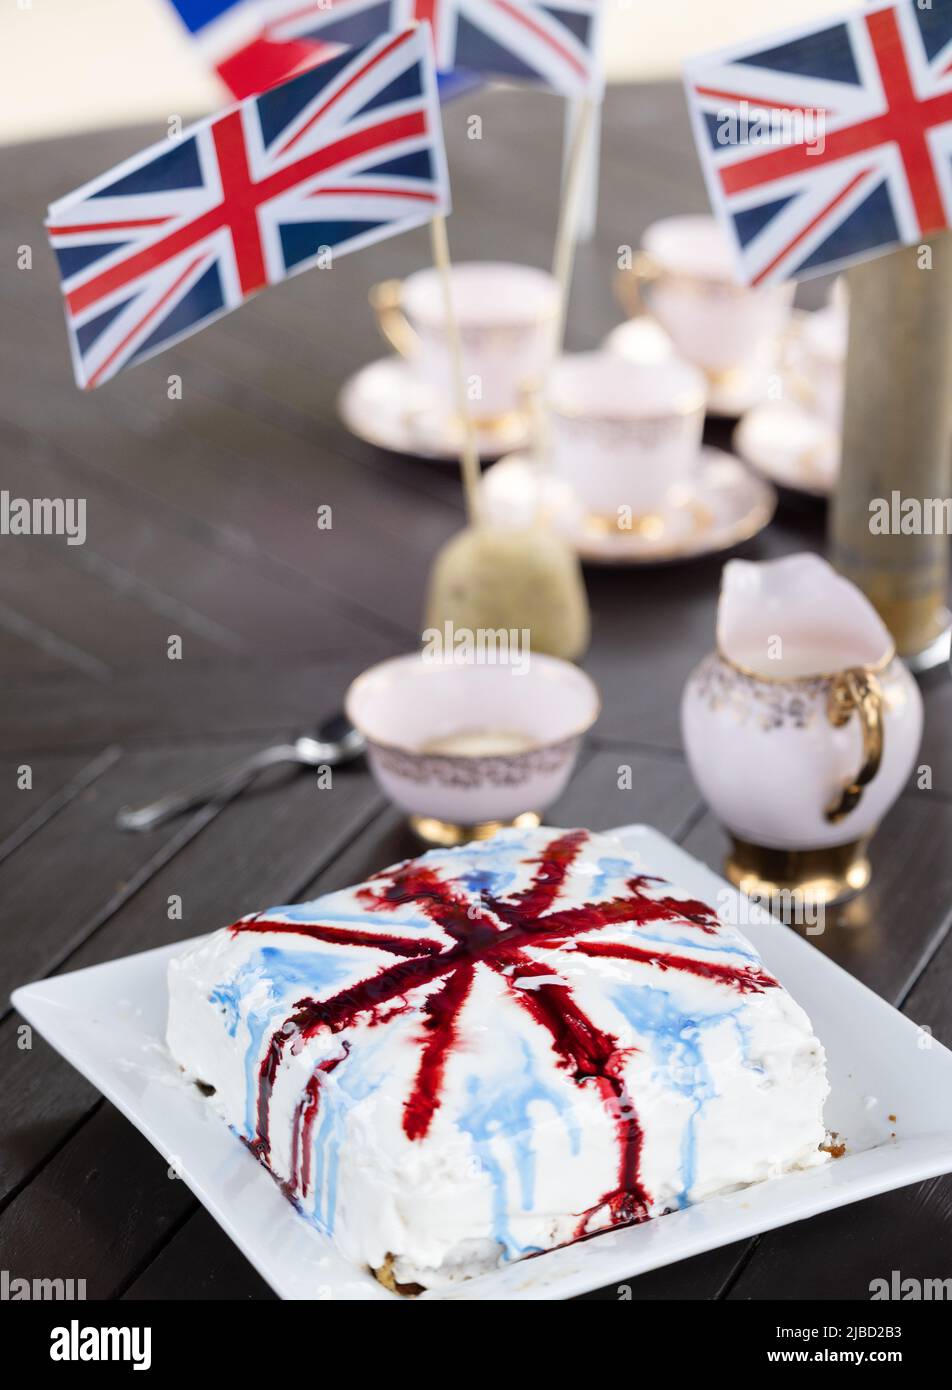 Concept Britishness,  British; bone china tea cups, union jacks, the flag of the UK, and cake as part of the Platinum Jubilee celebrations, Suffolk UK Stock Photo